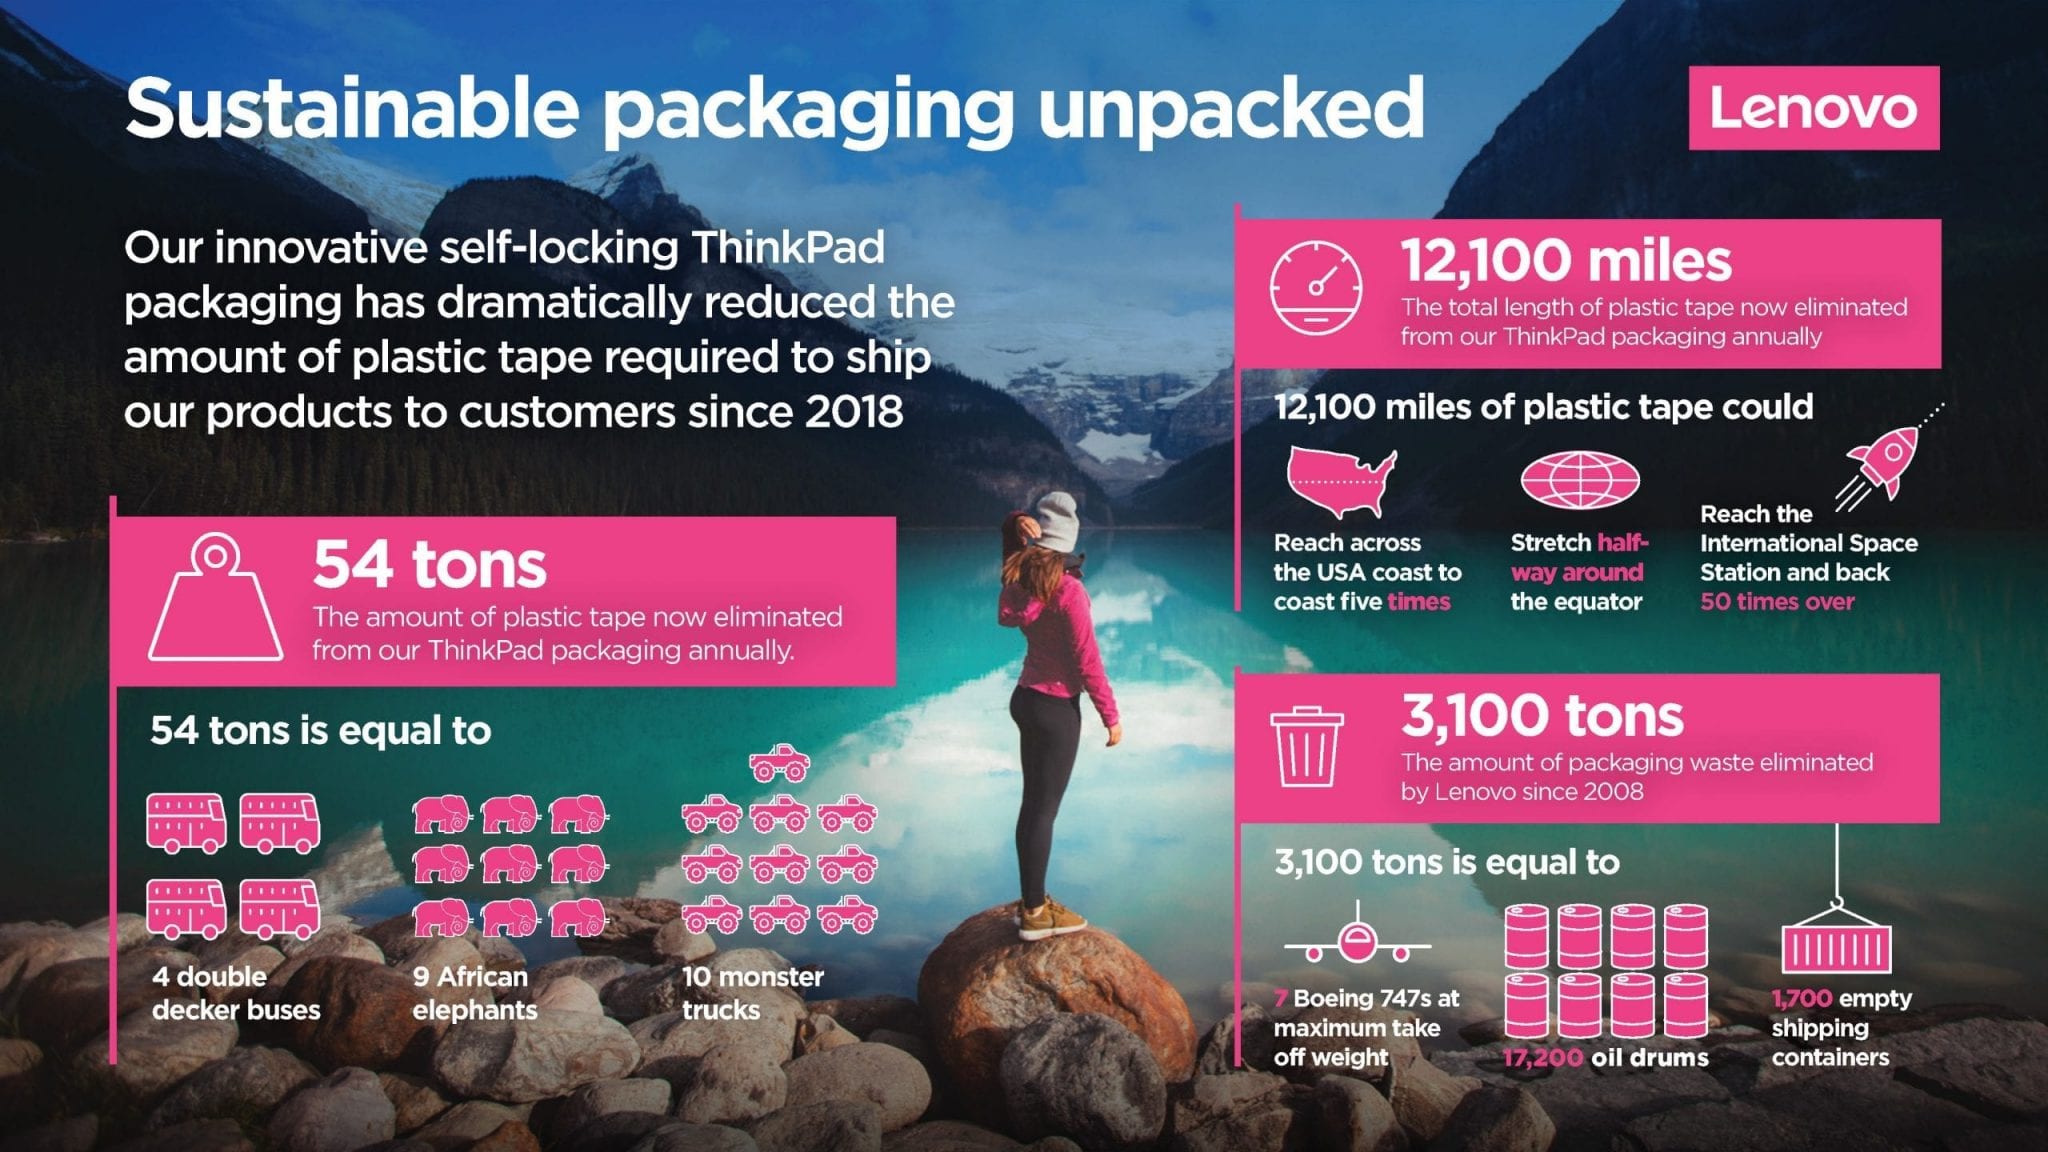 Infographic about Lenovo's sustainable packaging work